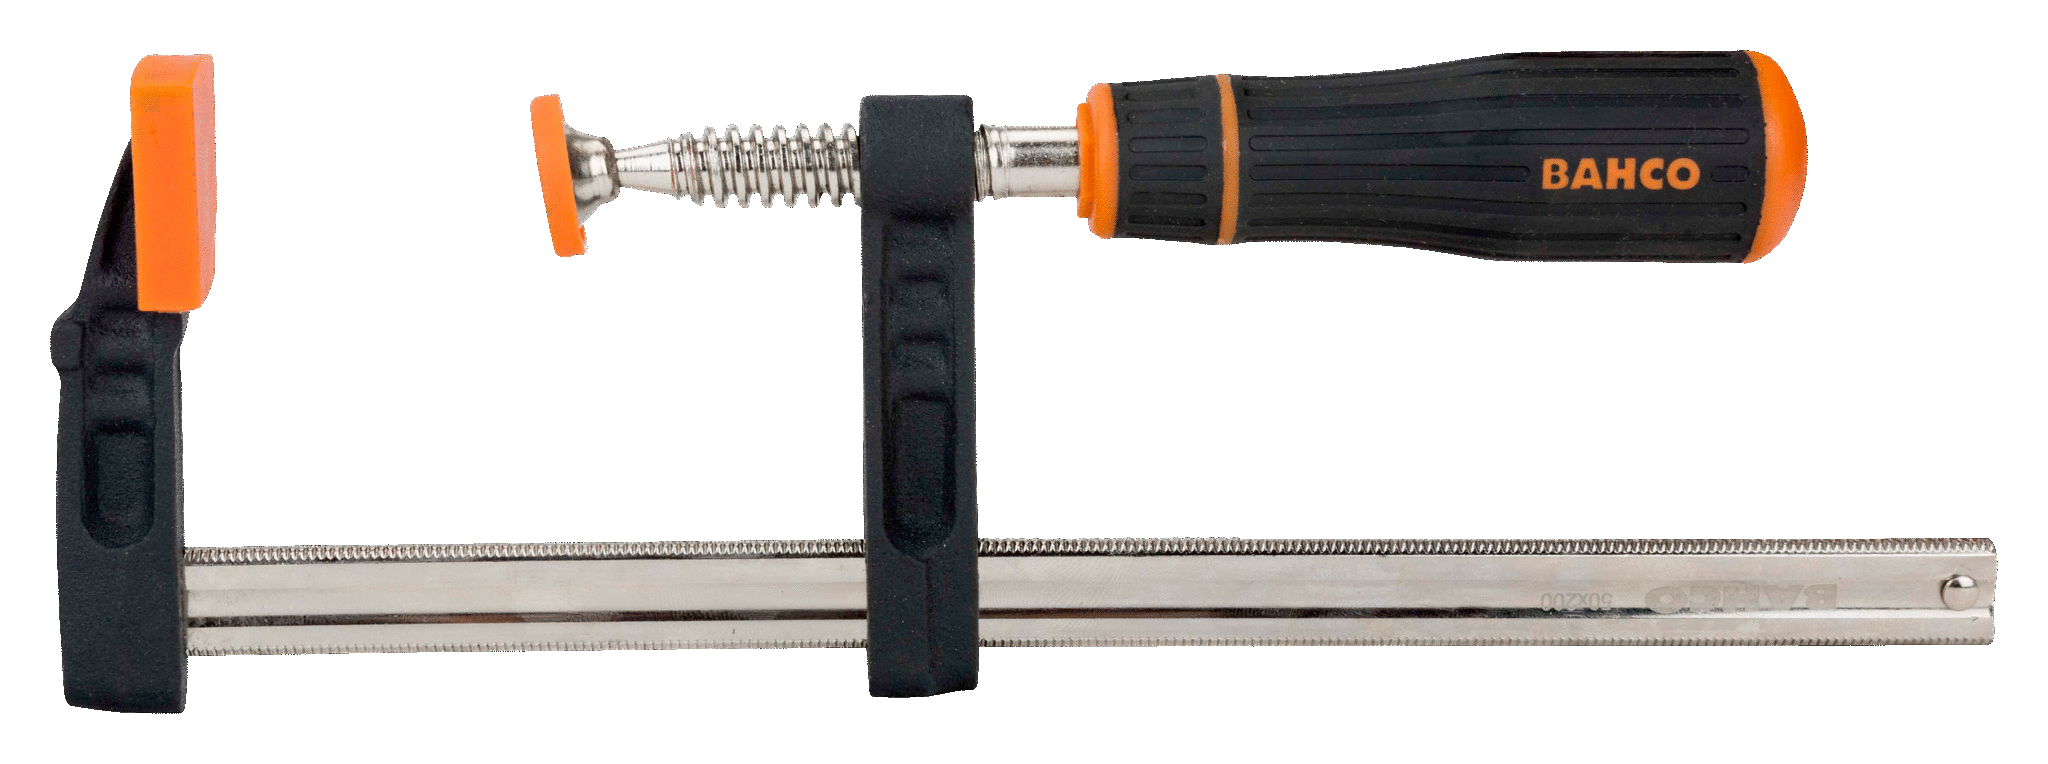 F-Clamps with Rubberised Handle - 420SH-80-160 by Bahco